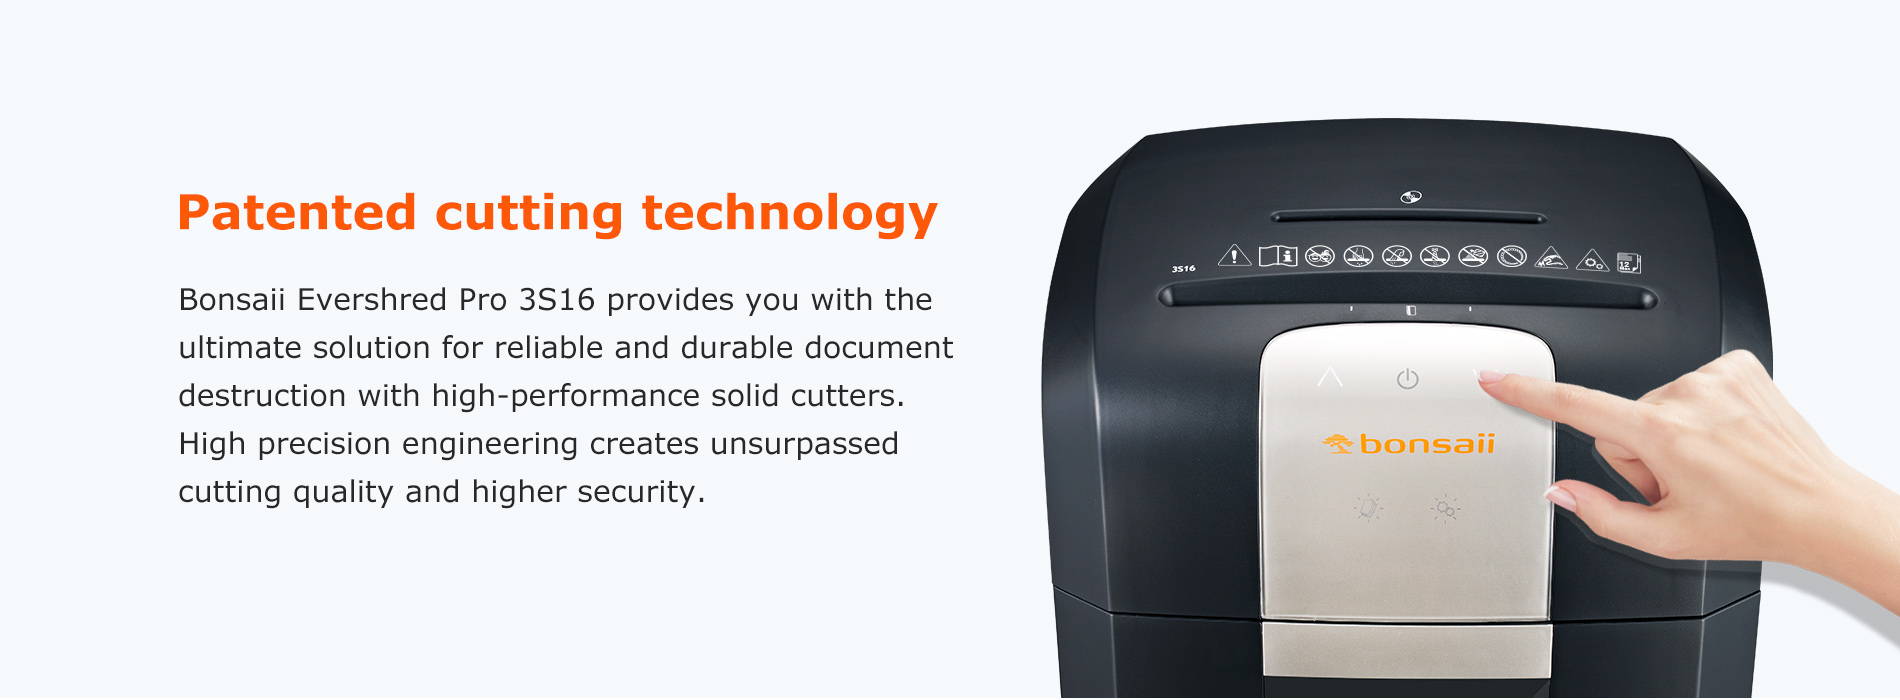 Patented cutting technology Bonsaii Evershred Pro 3S16 provides you with the ultimate solution for reliable and durable document destruction with high-performance solid cutters. High precision engineering creates unsurpassed cutting quality and higher security.